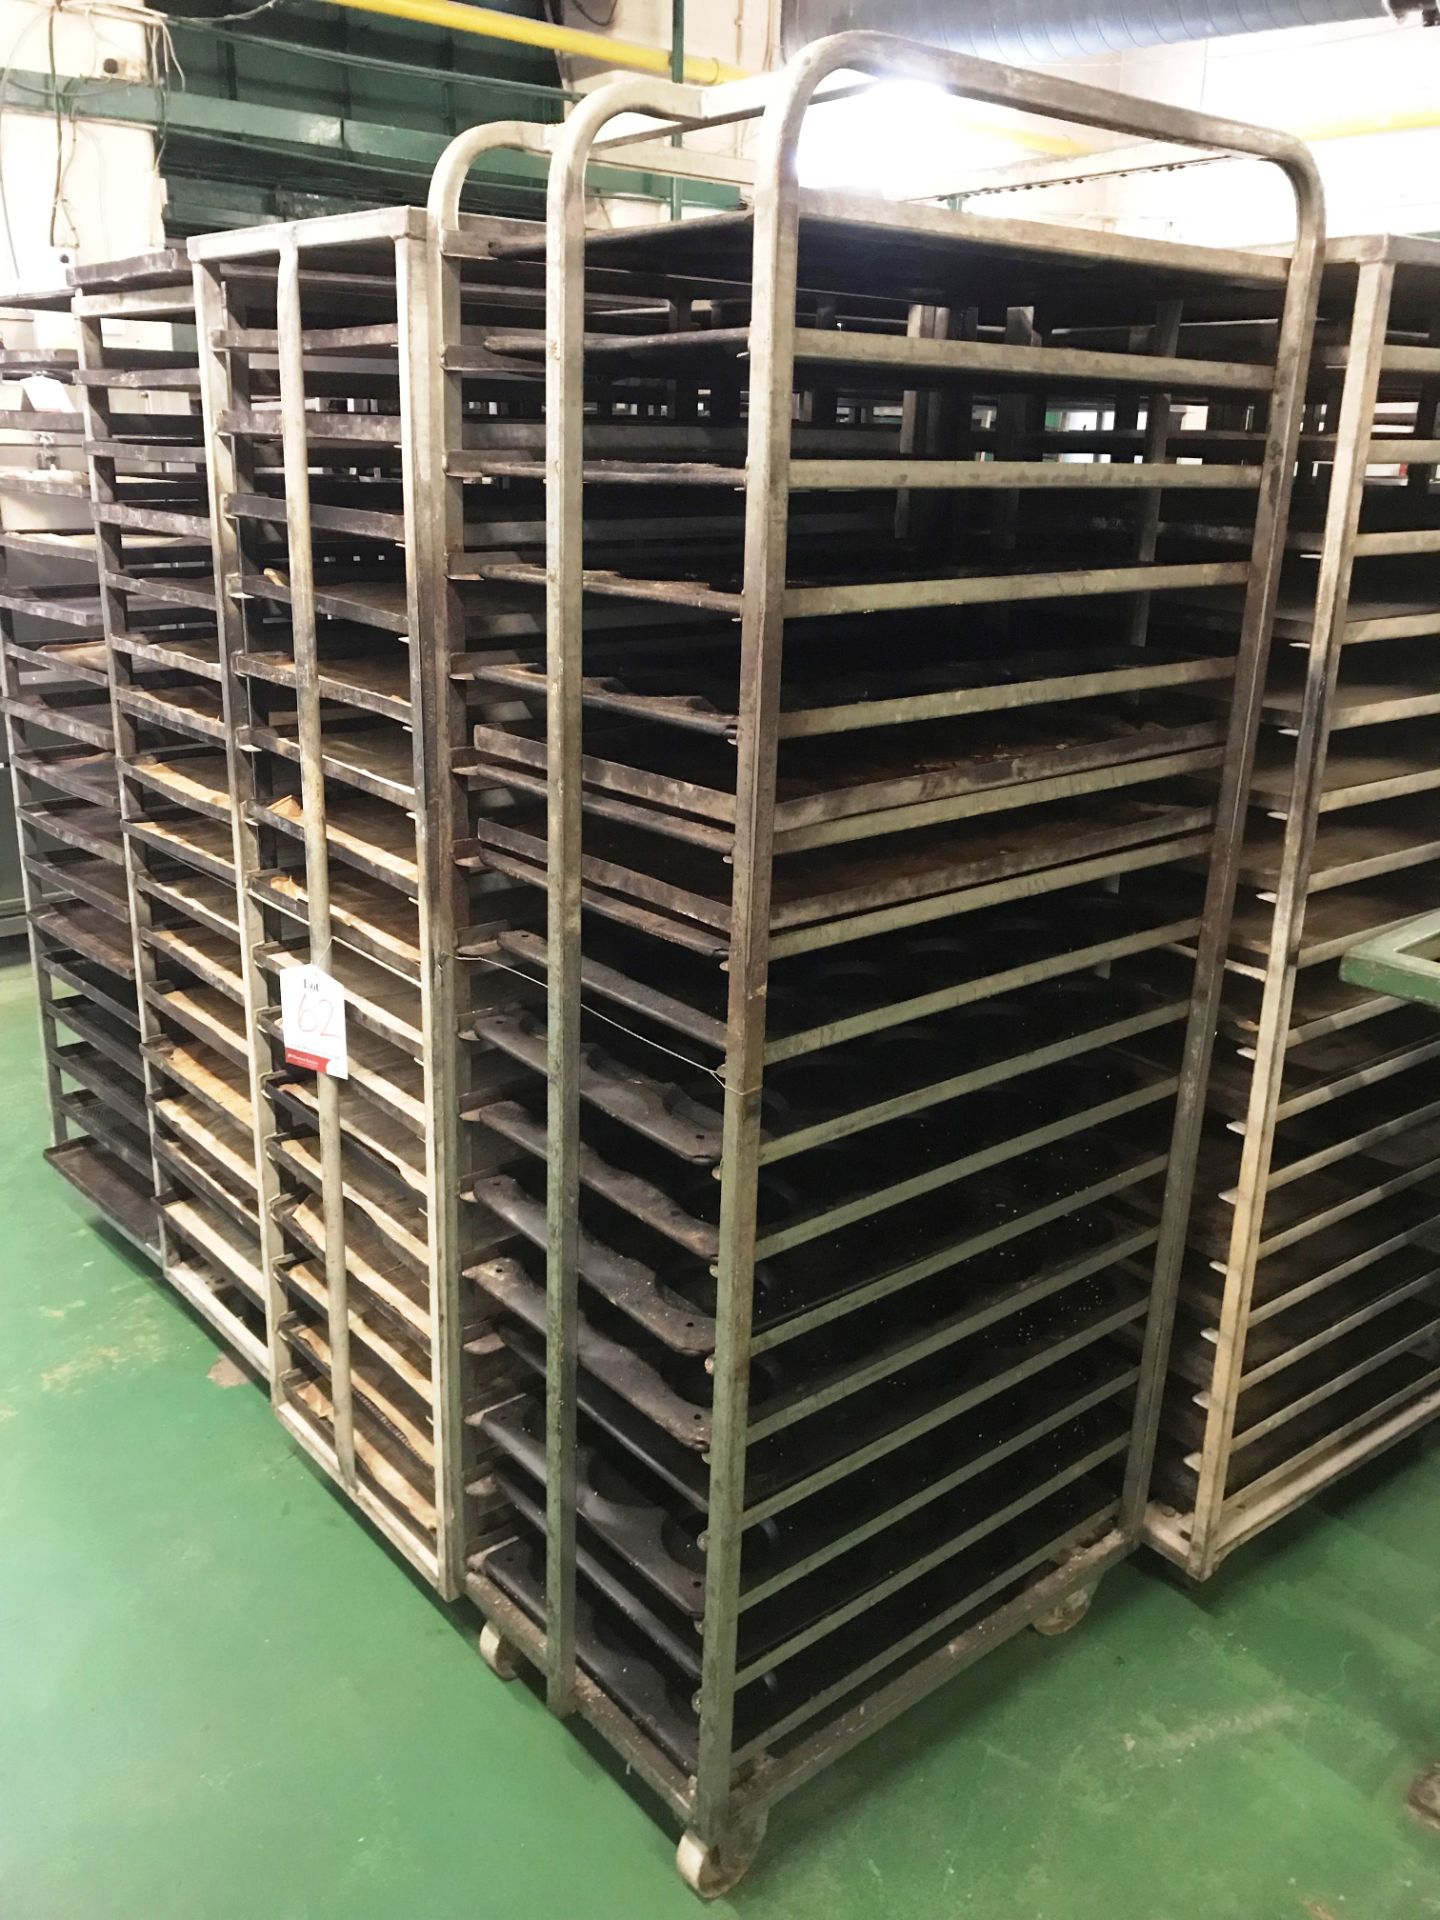 16 x Various Bakery Racks & Trays - As Pictured - Image 2 of 3